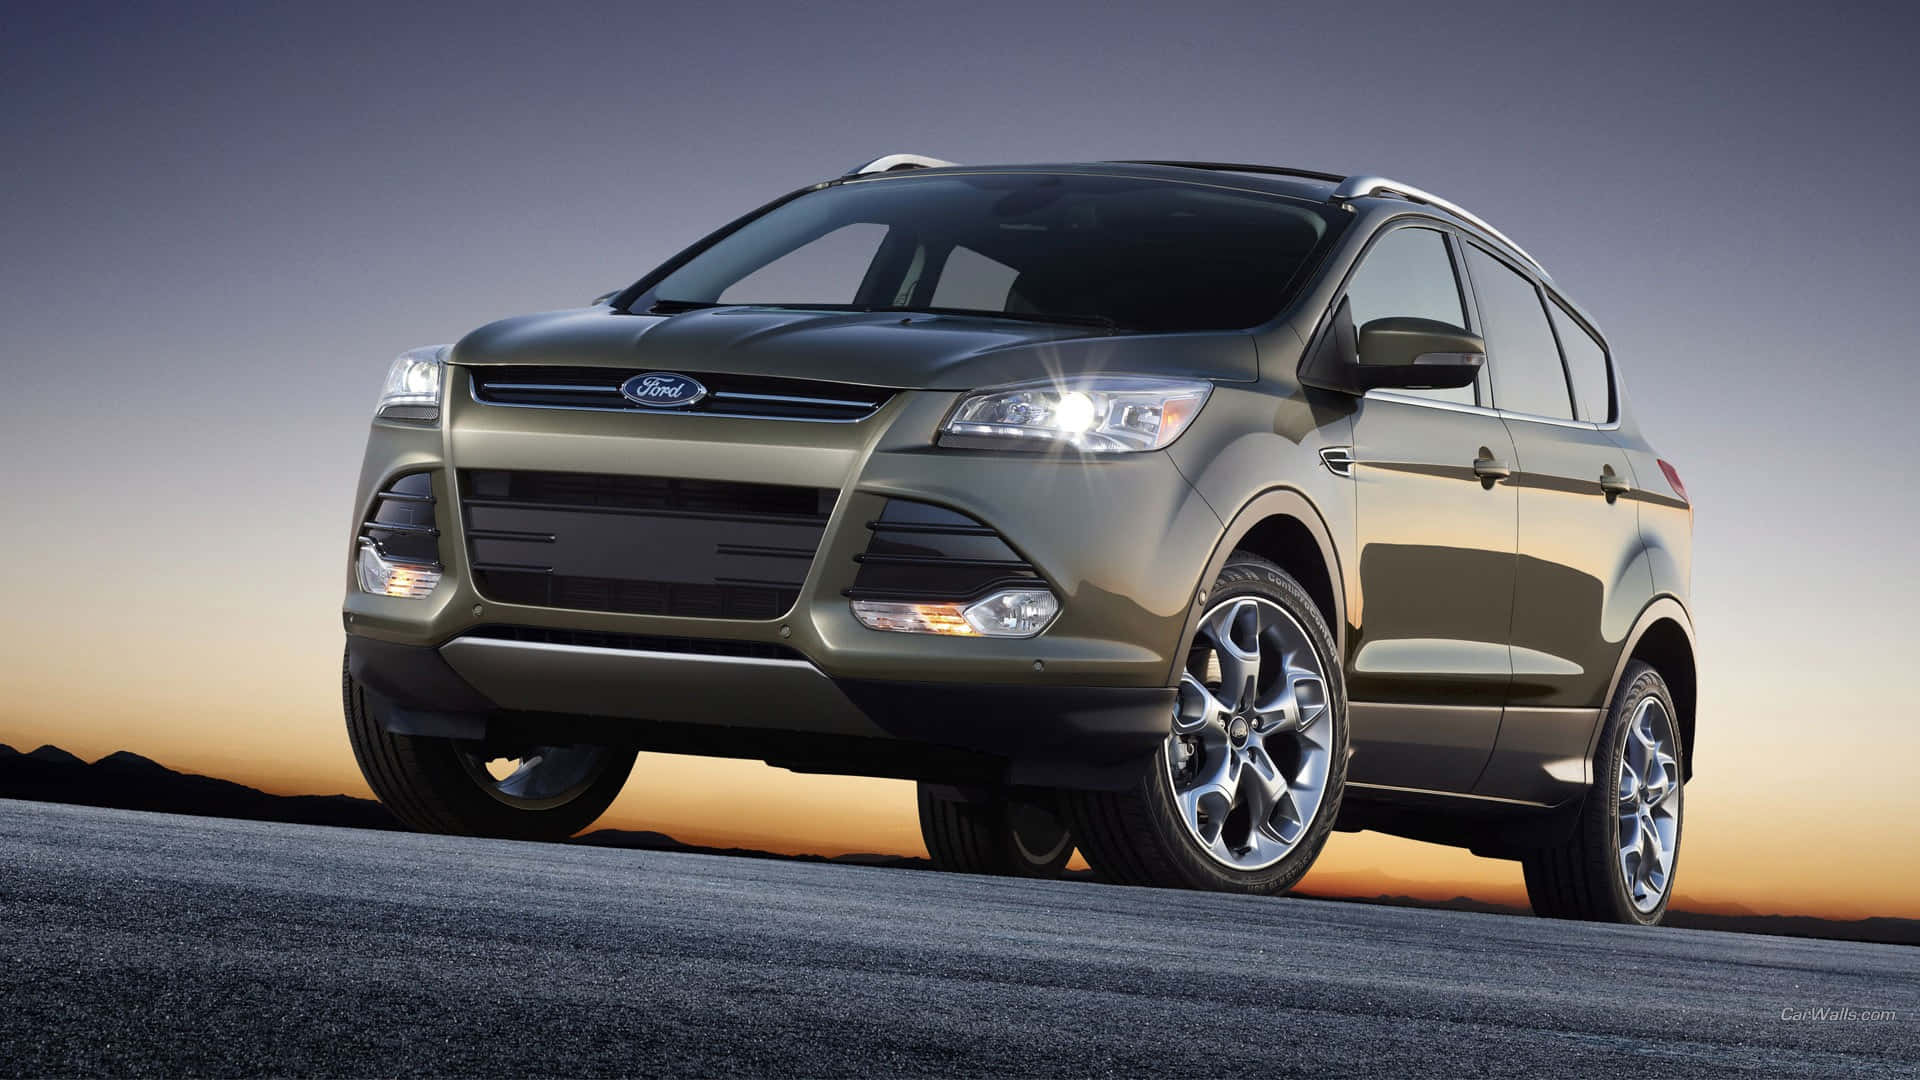 A Stunning Ford Escape SUV On Display Wallpaper